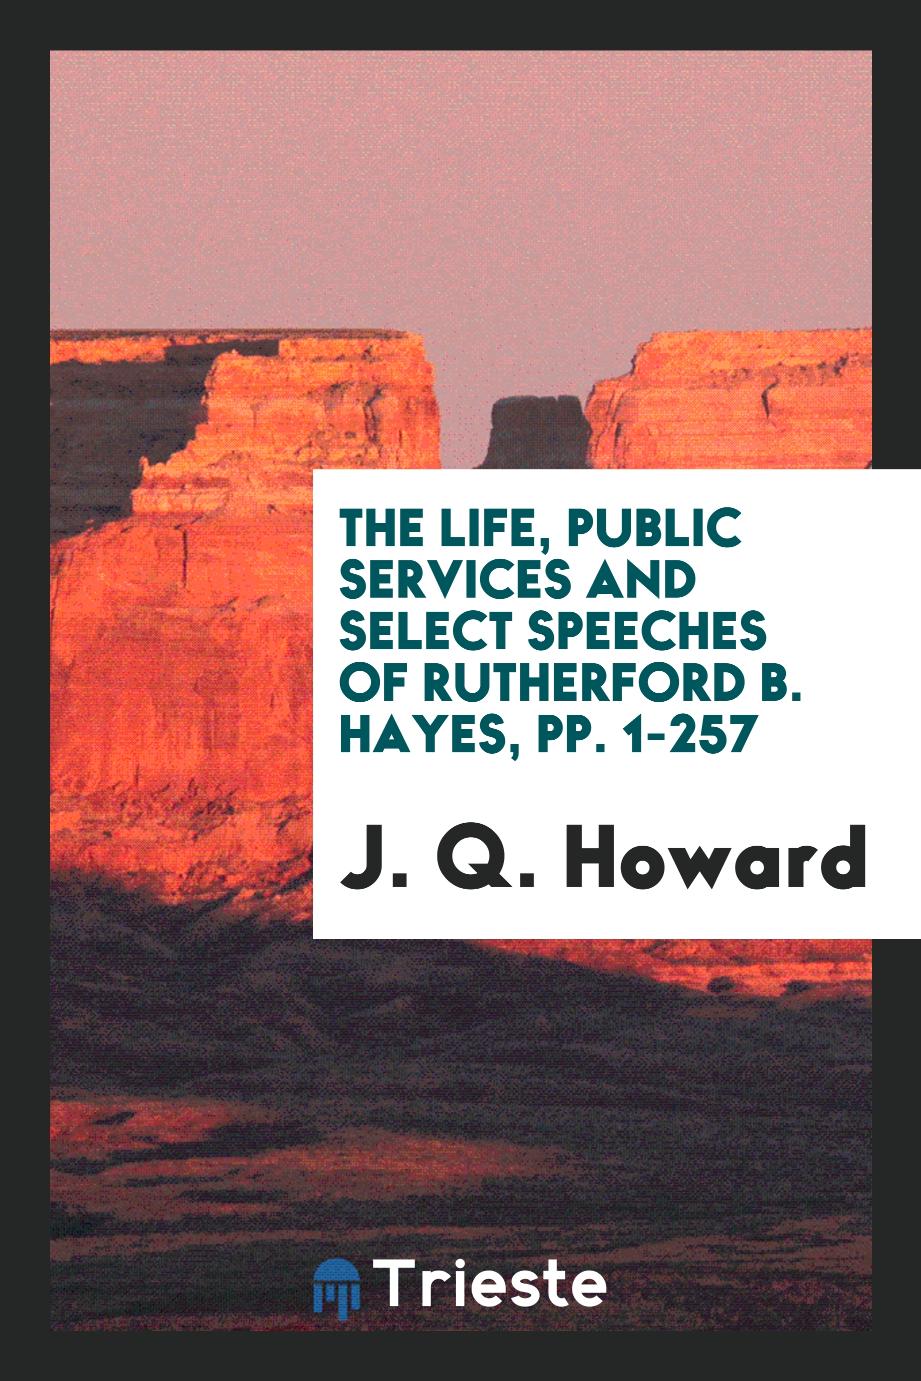 The Life, Public Services and Select Speeches of Rutherford B. Hayes, pp. 1-257